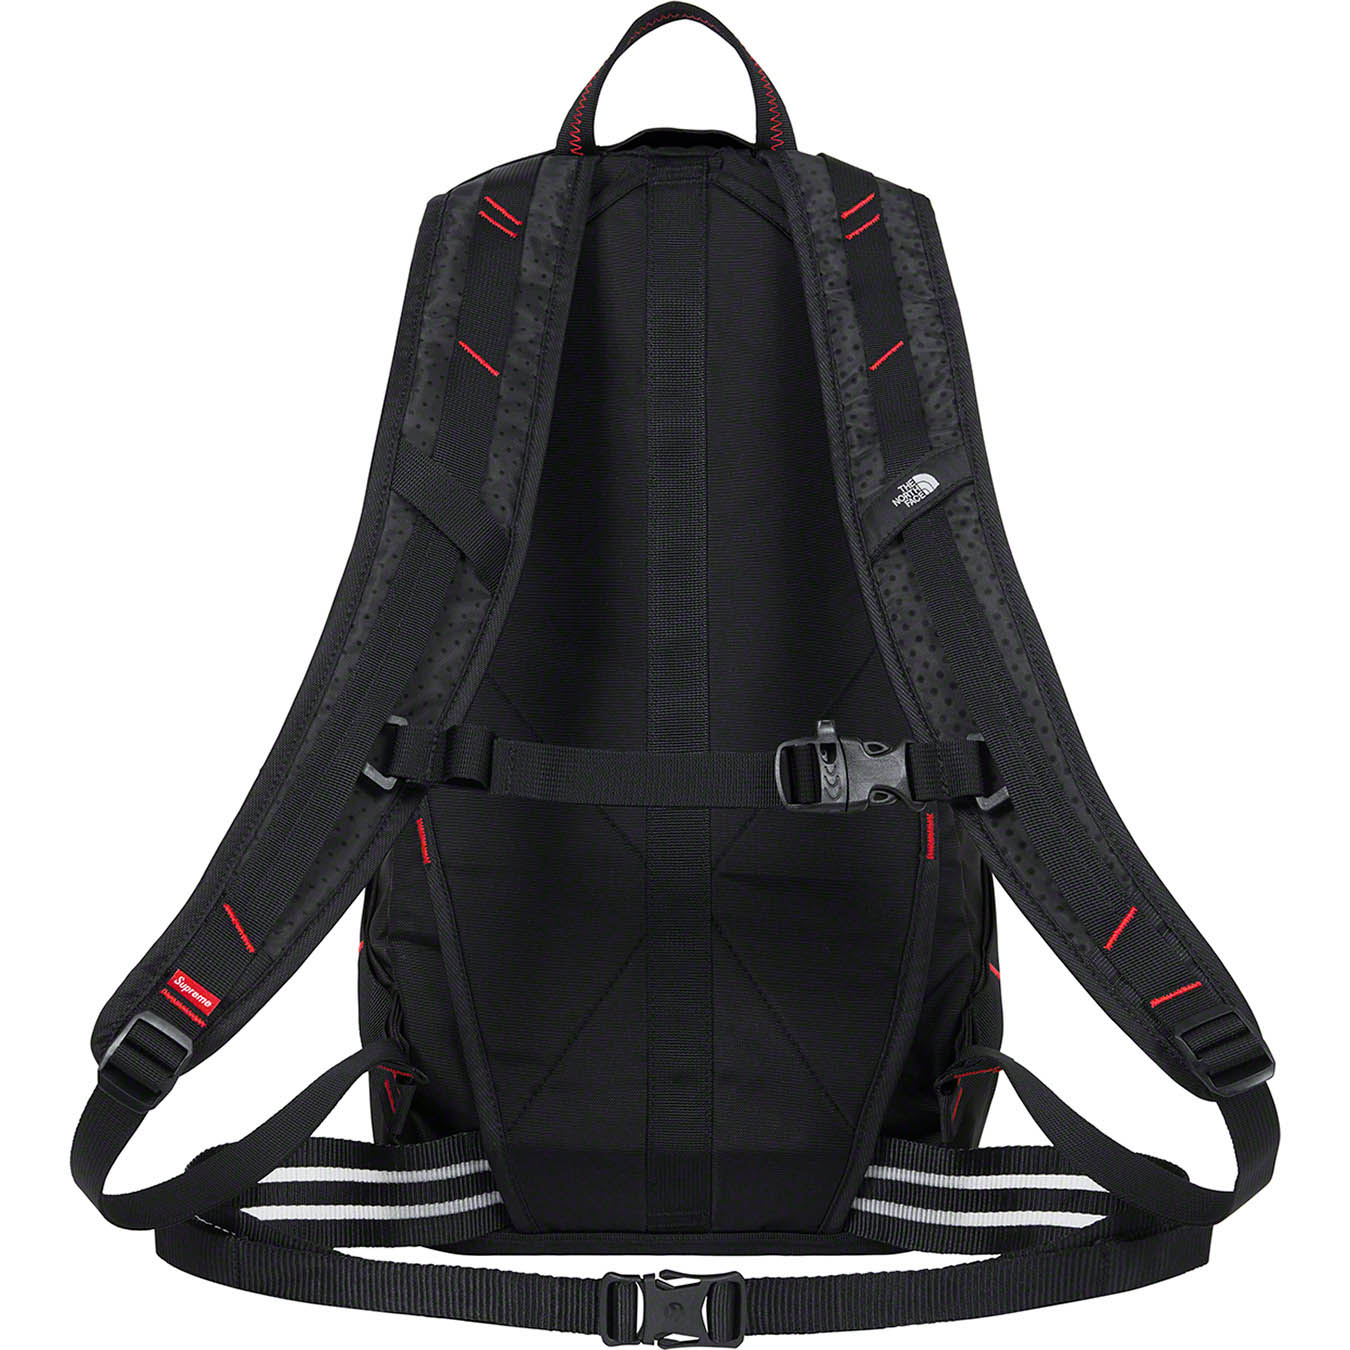 Supreme®/The North Face® Summit Series Outer Tape Seam Route Rocket Backpack